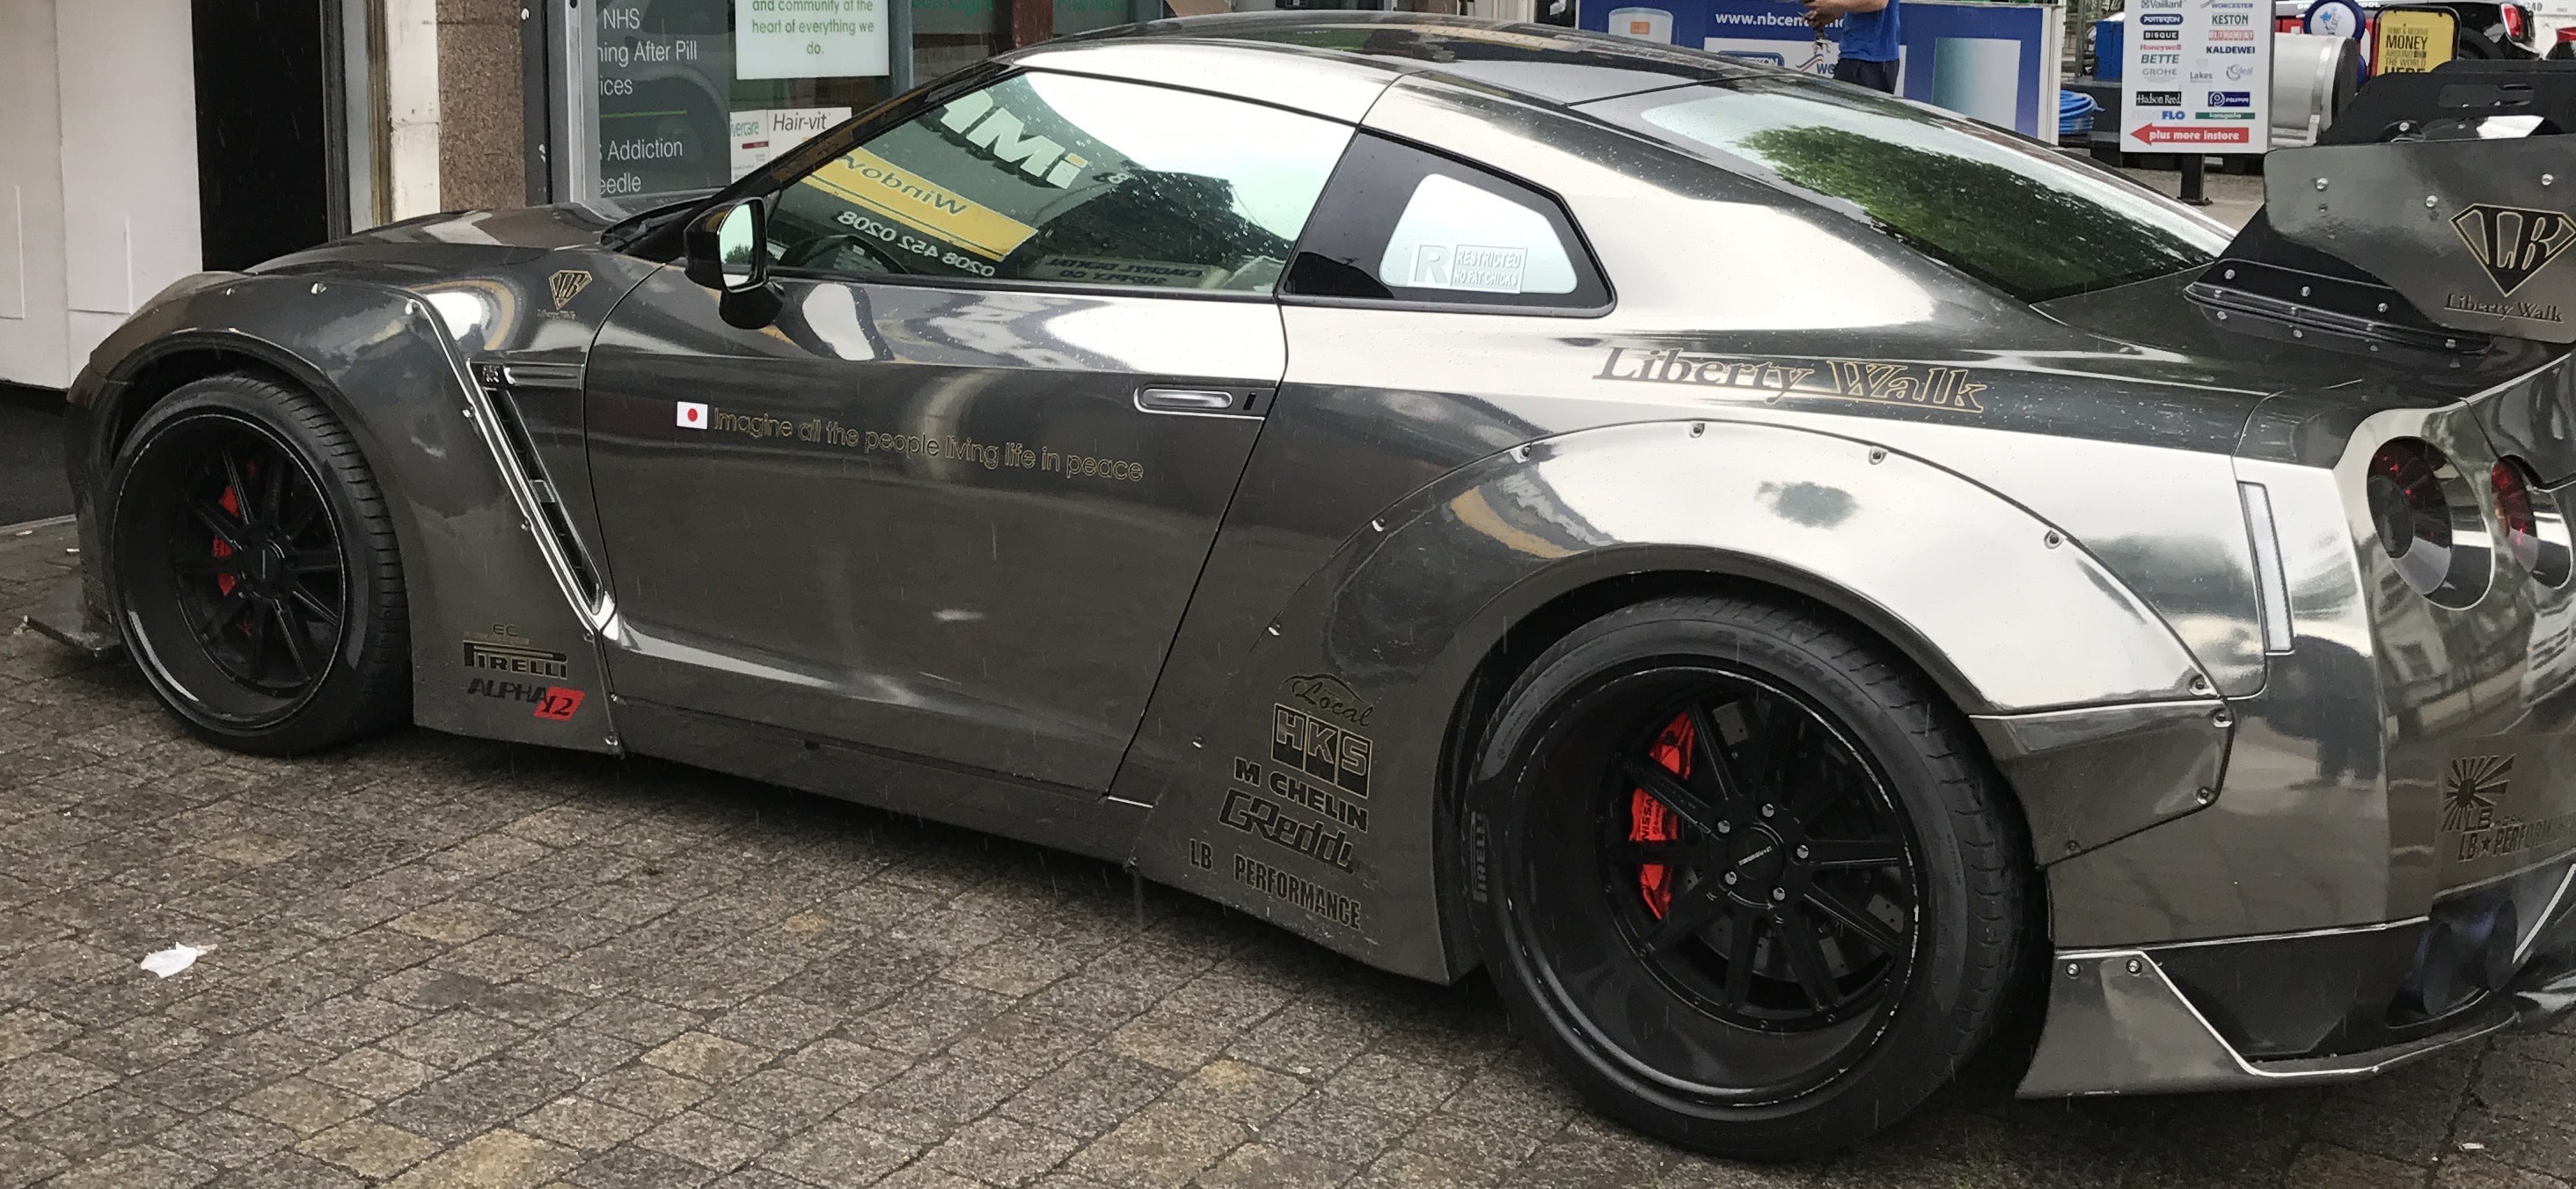 Full Customized Car Wrap Lister Bell car in London – Impact Window Tinting